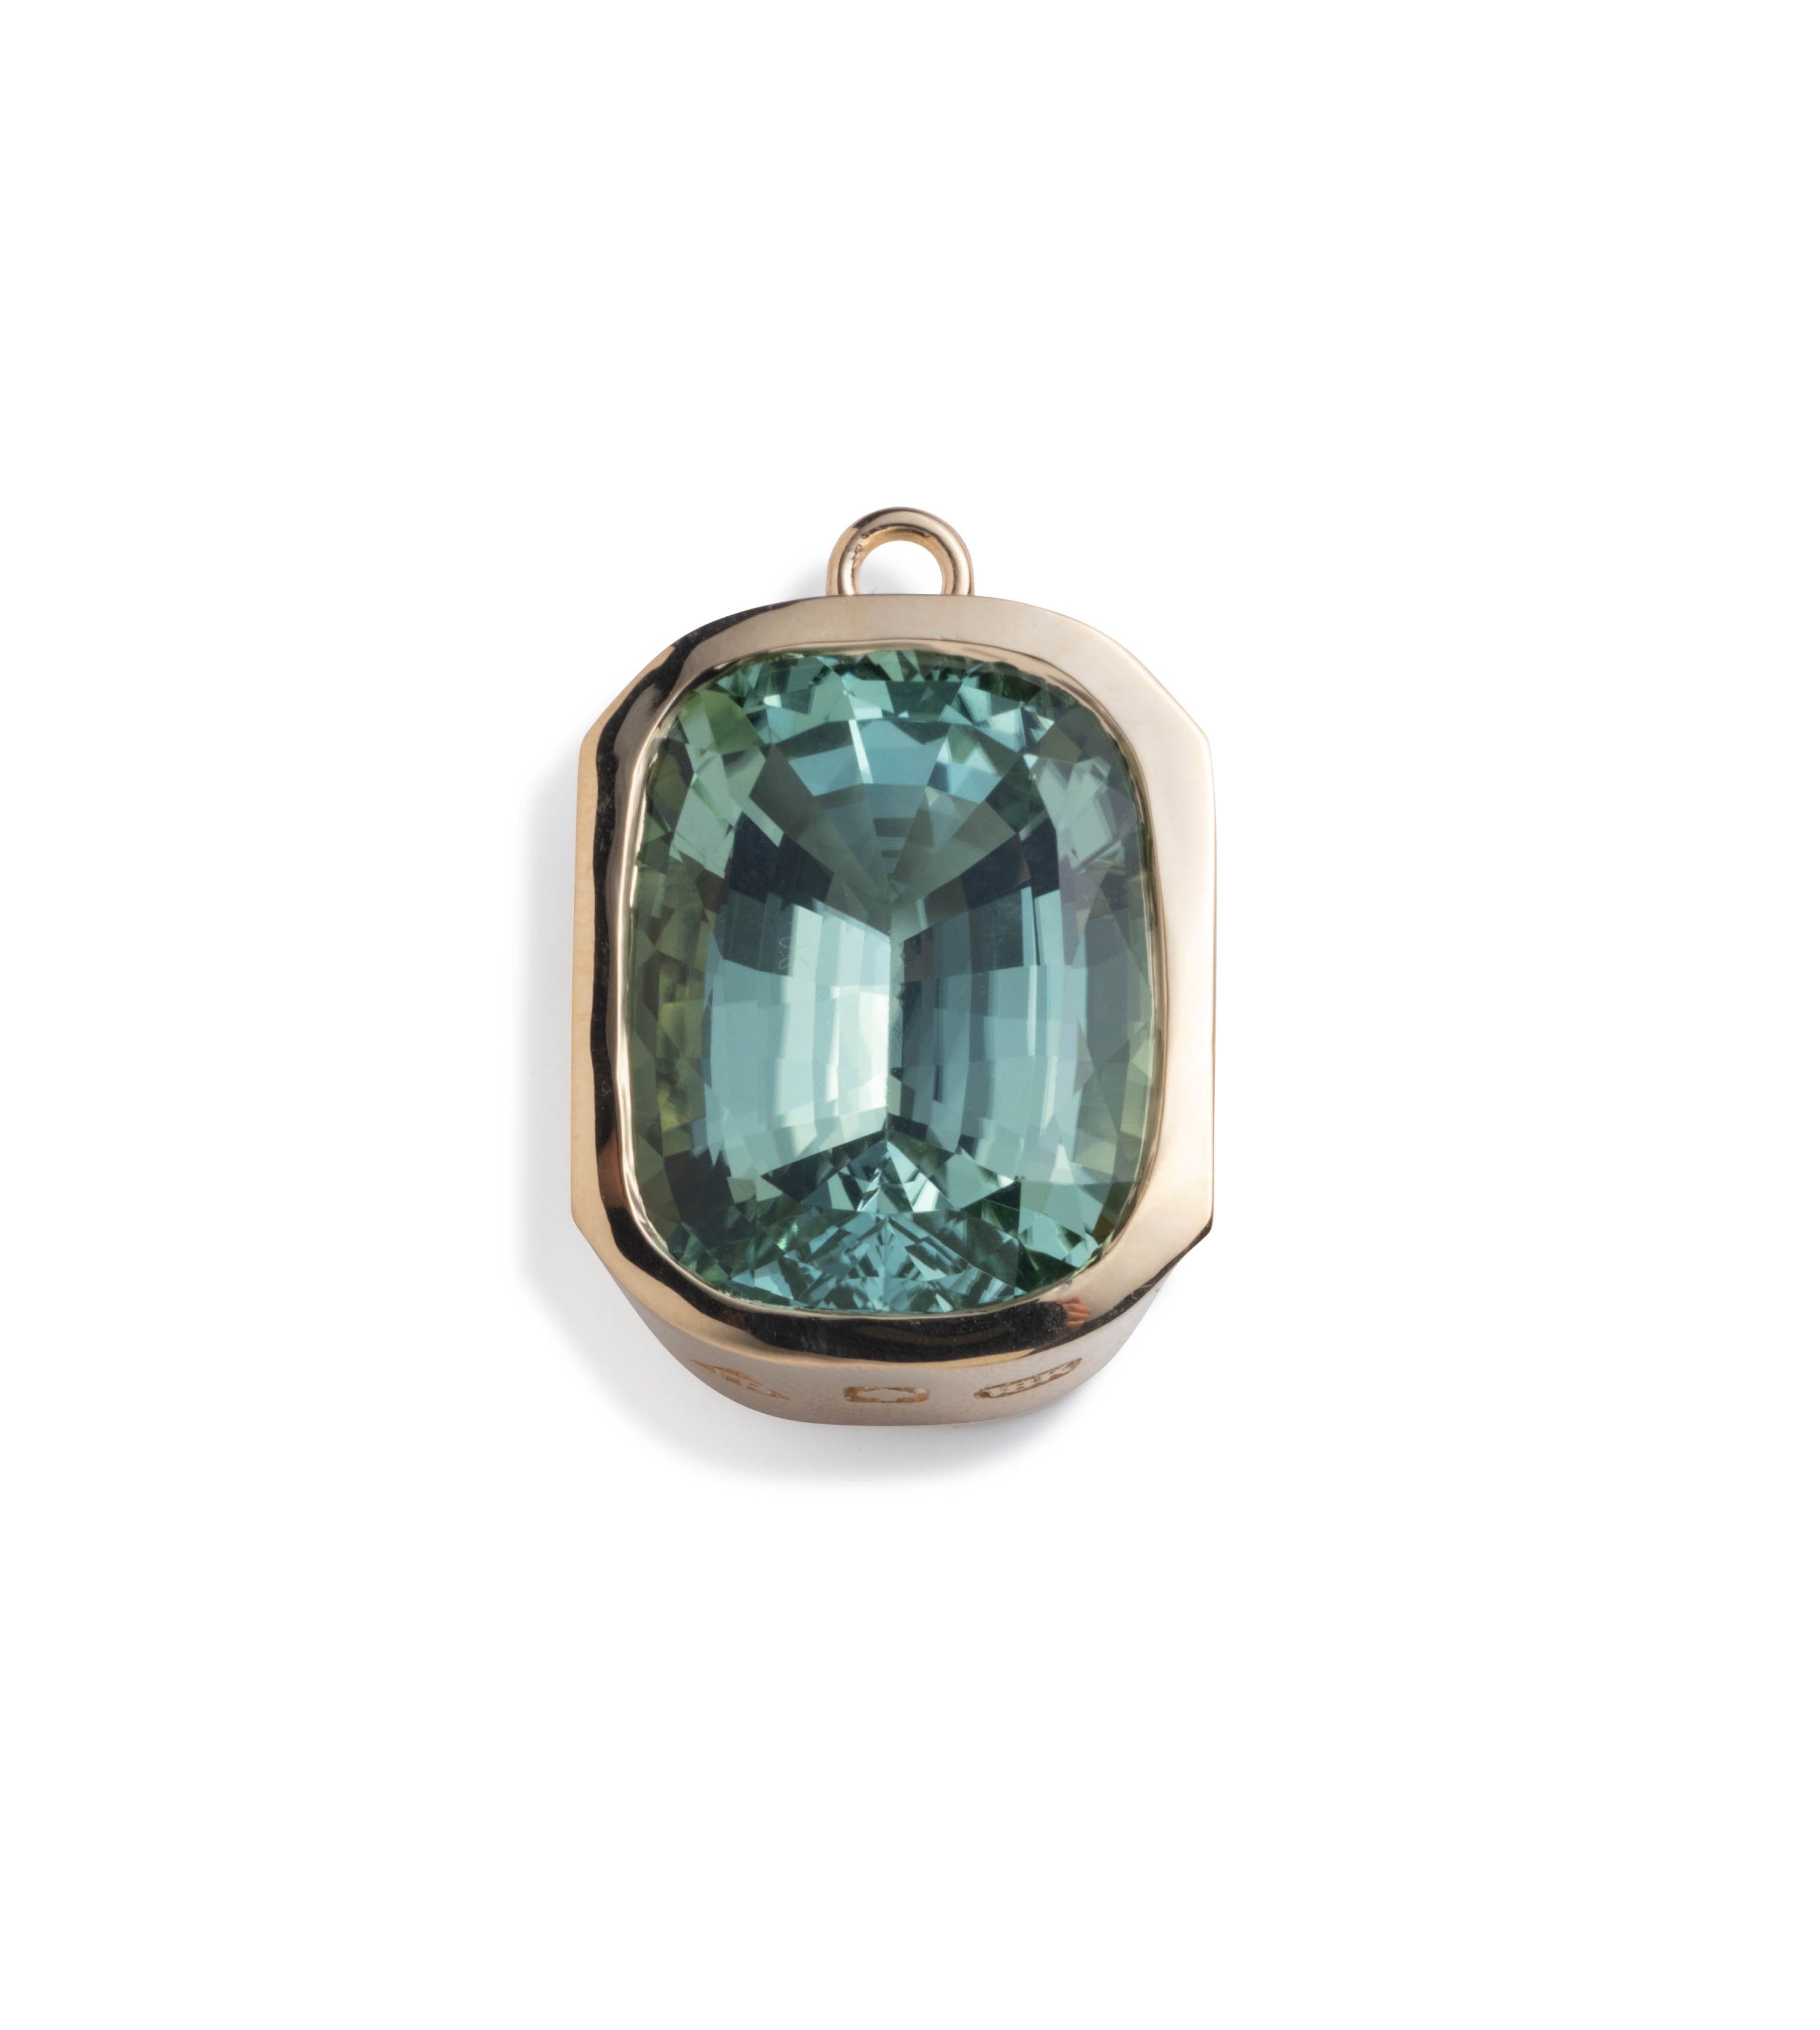 24.85ct Green Tourmaline - Reverie : One of A Kind Gemstone Pendant